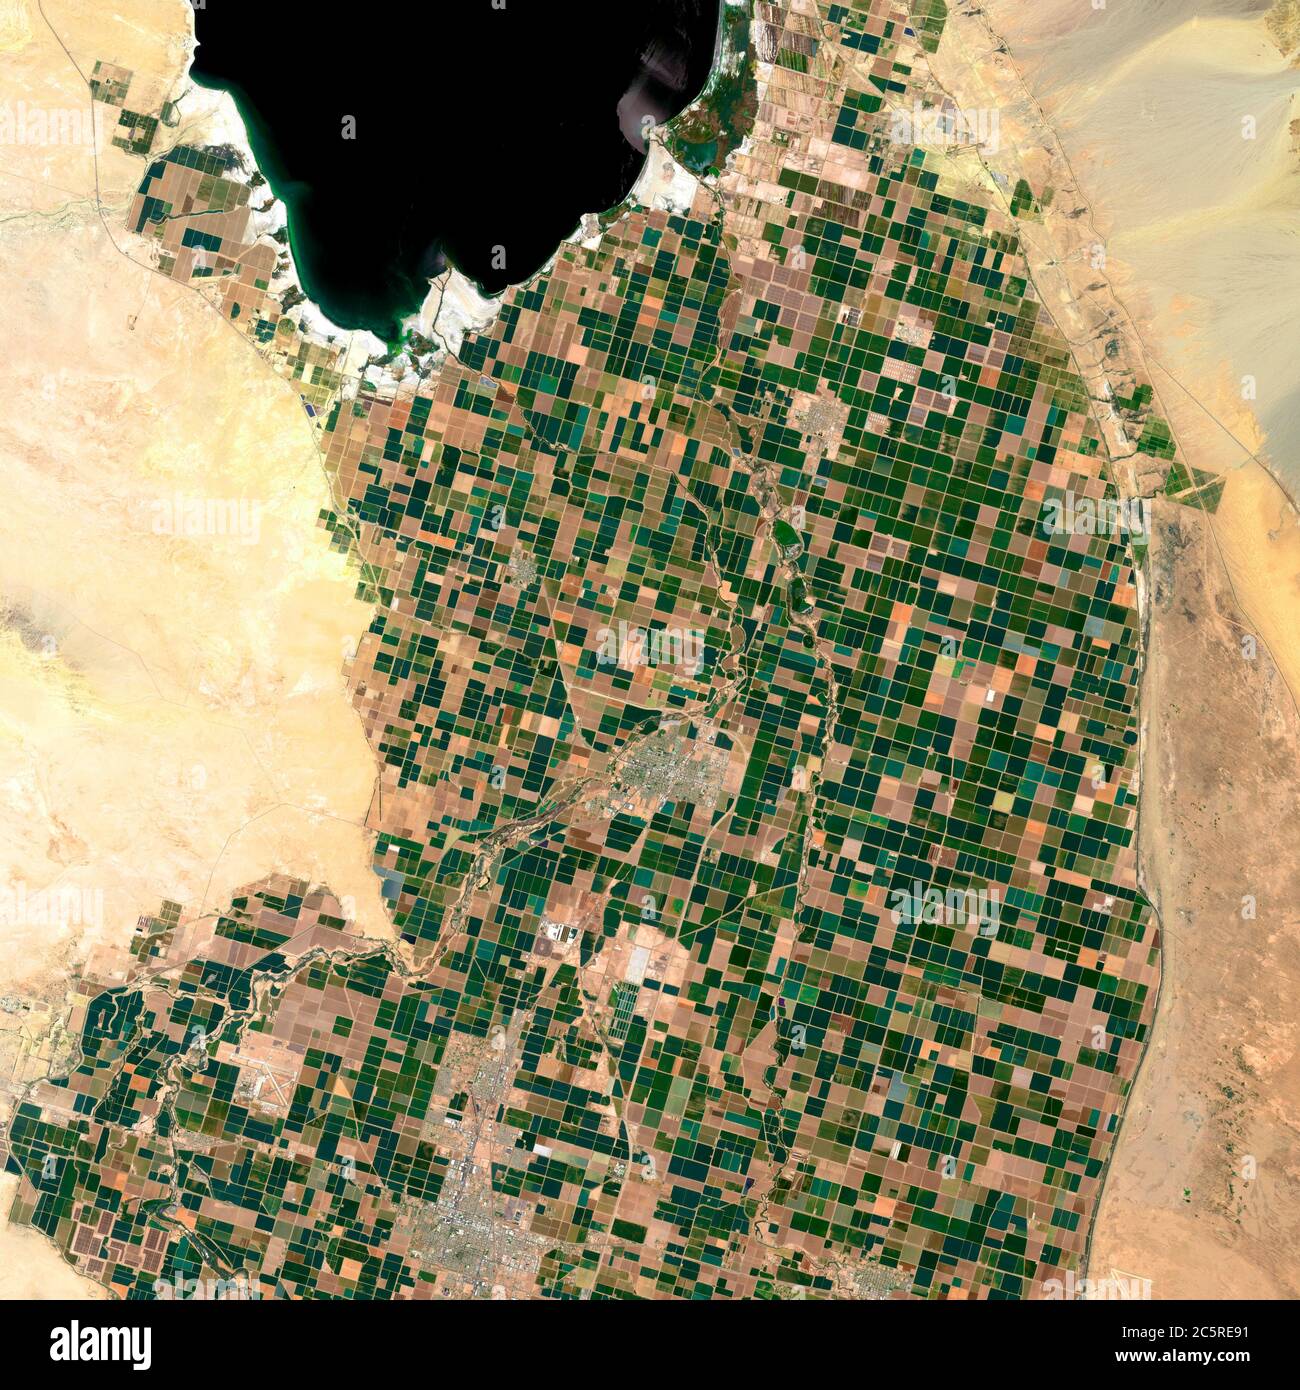 Image satellite of the presence crops and andcities. Sonora desert of Brawley, California, EUA. Observation of the surface of the earth from the sky. Stock Photo